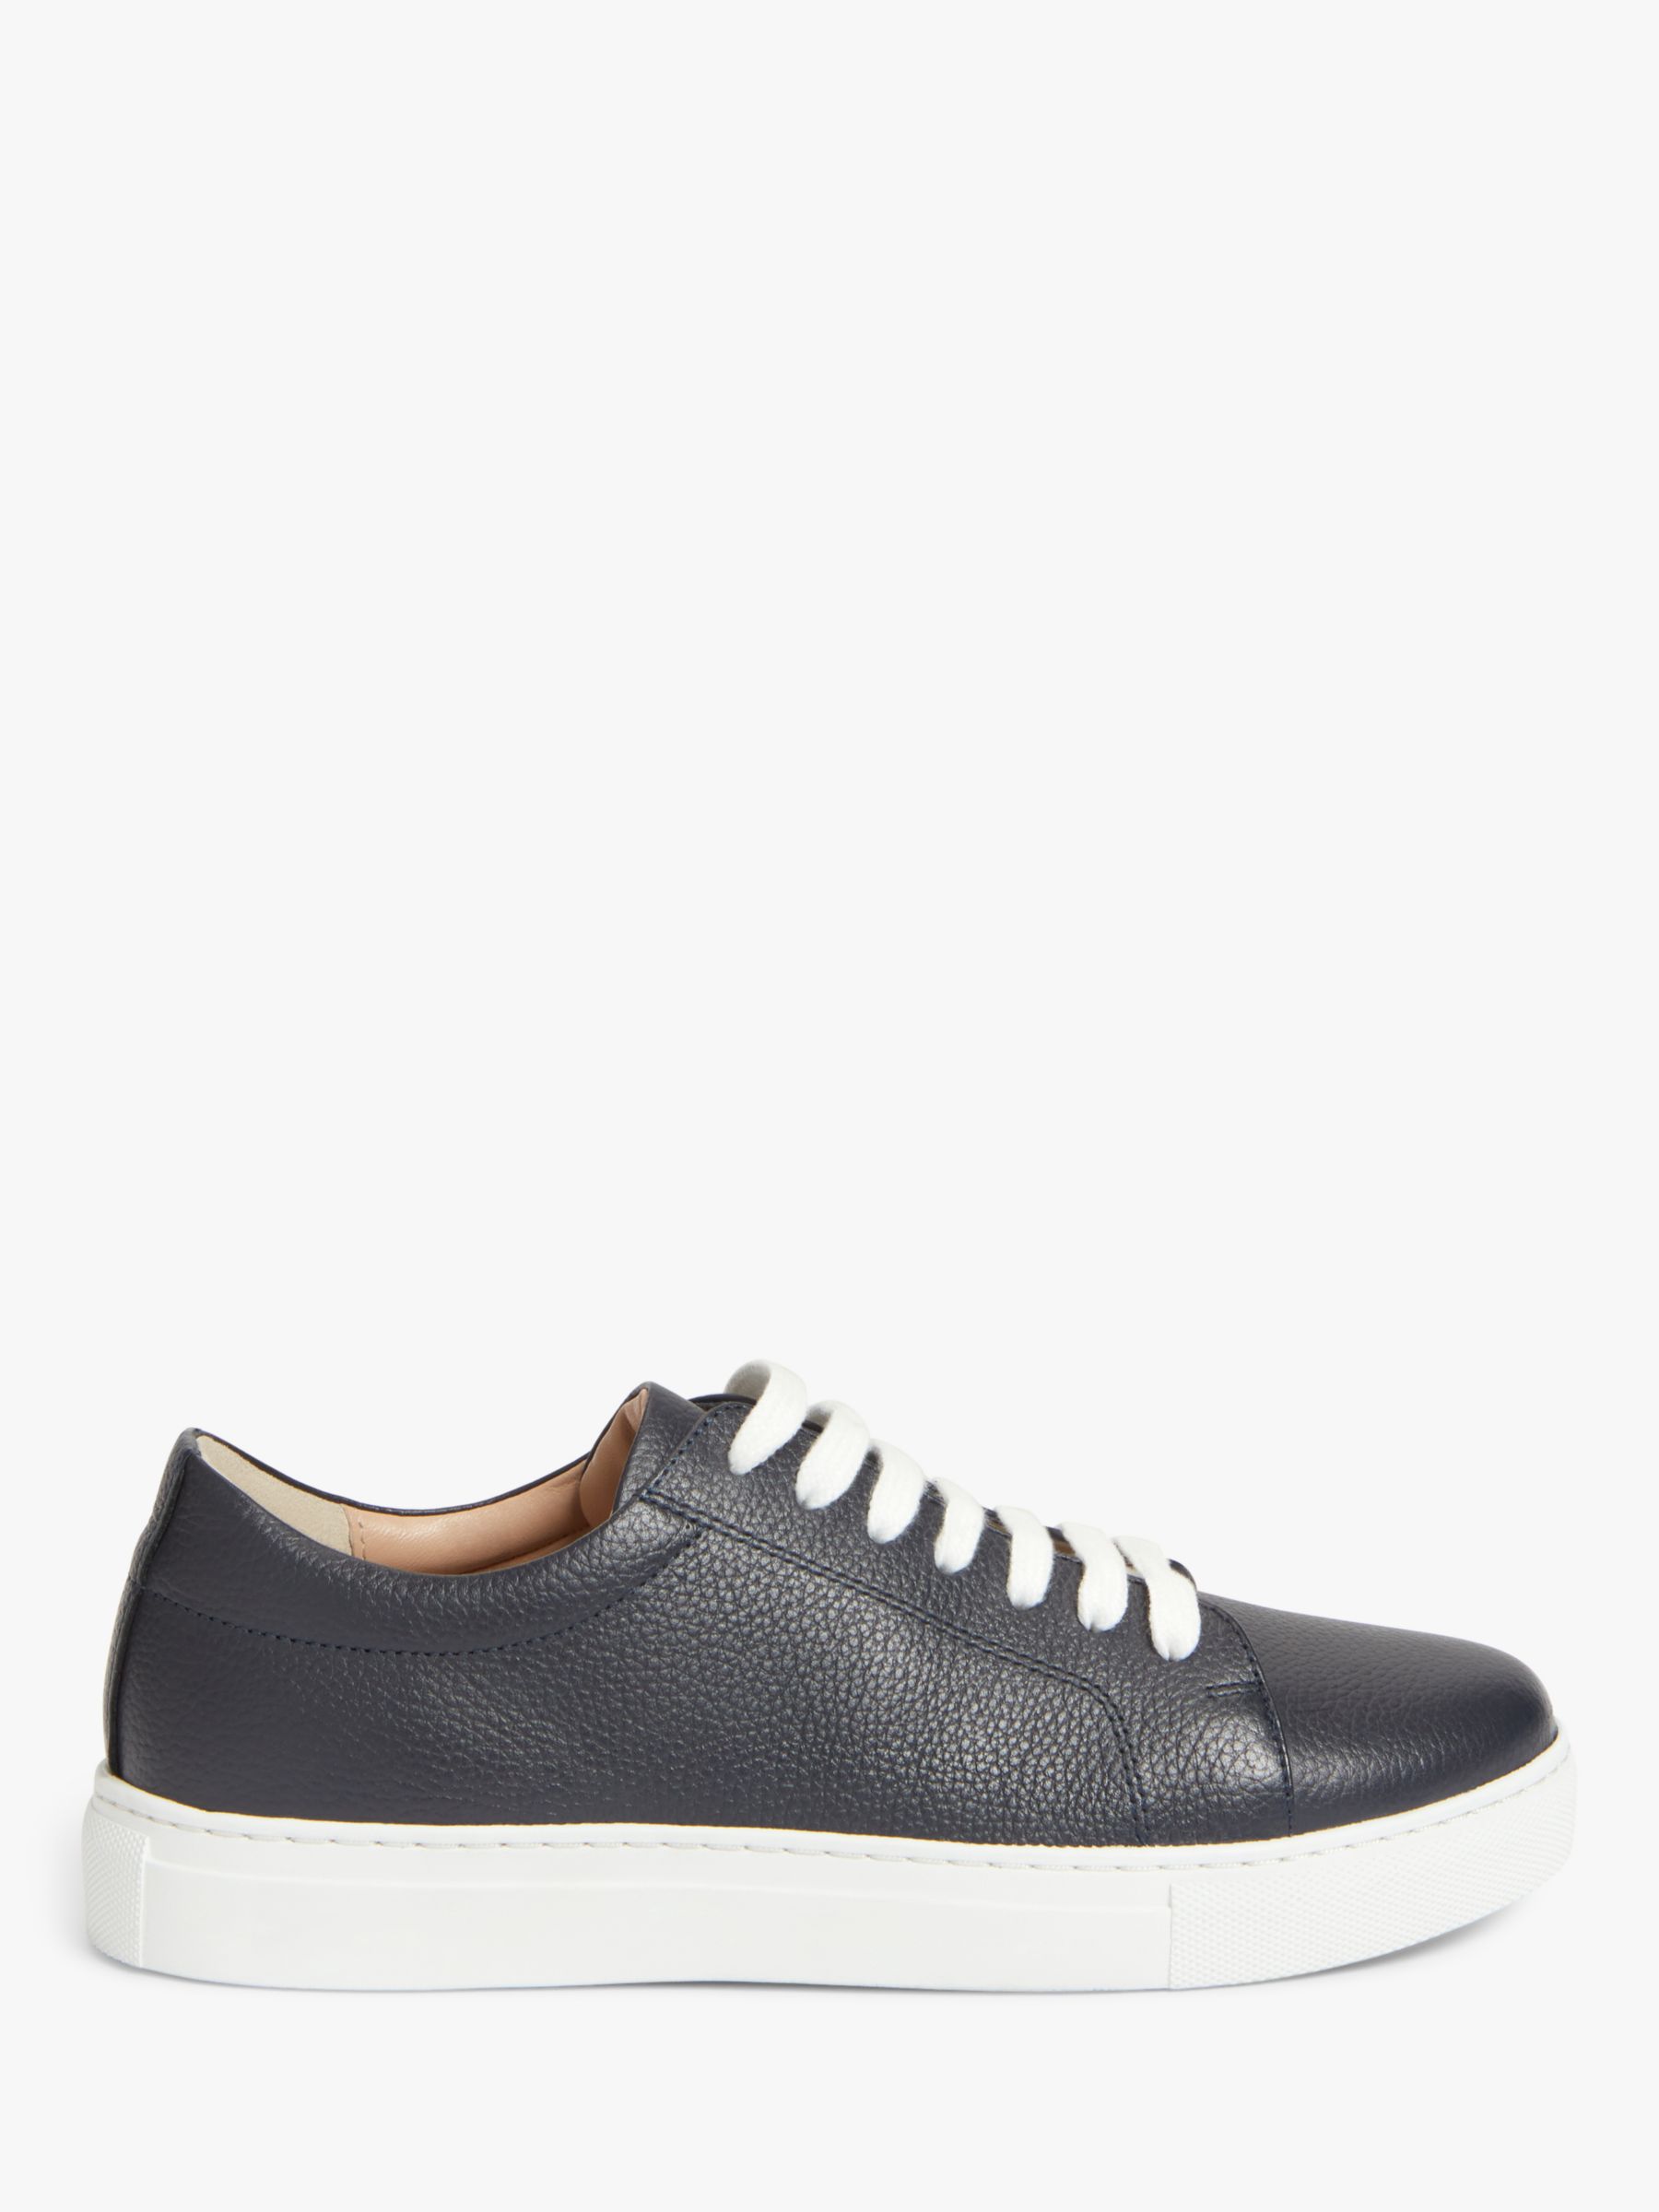 John Lewis Florette Wide Fit Leather Trainers, Navy at John Lewis ...